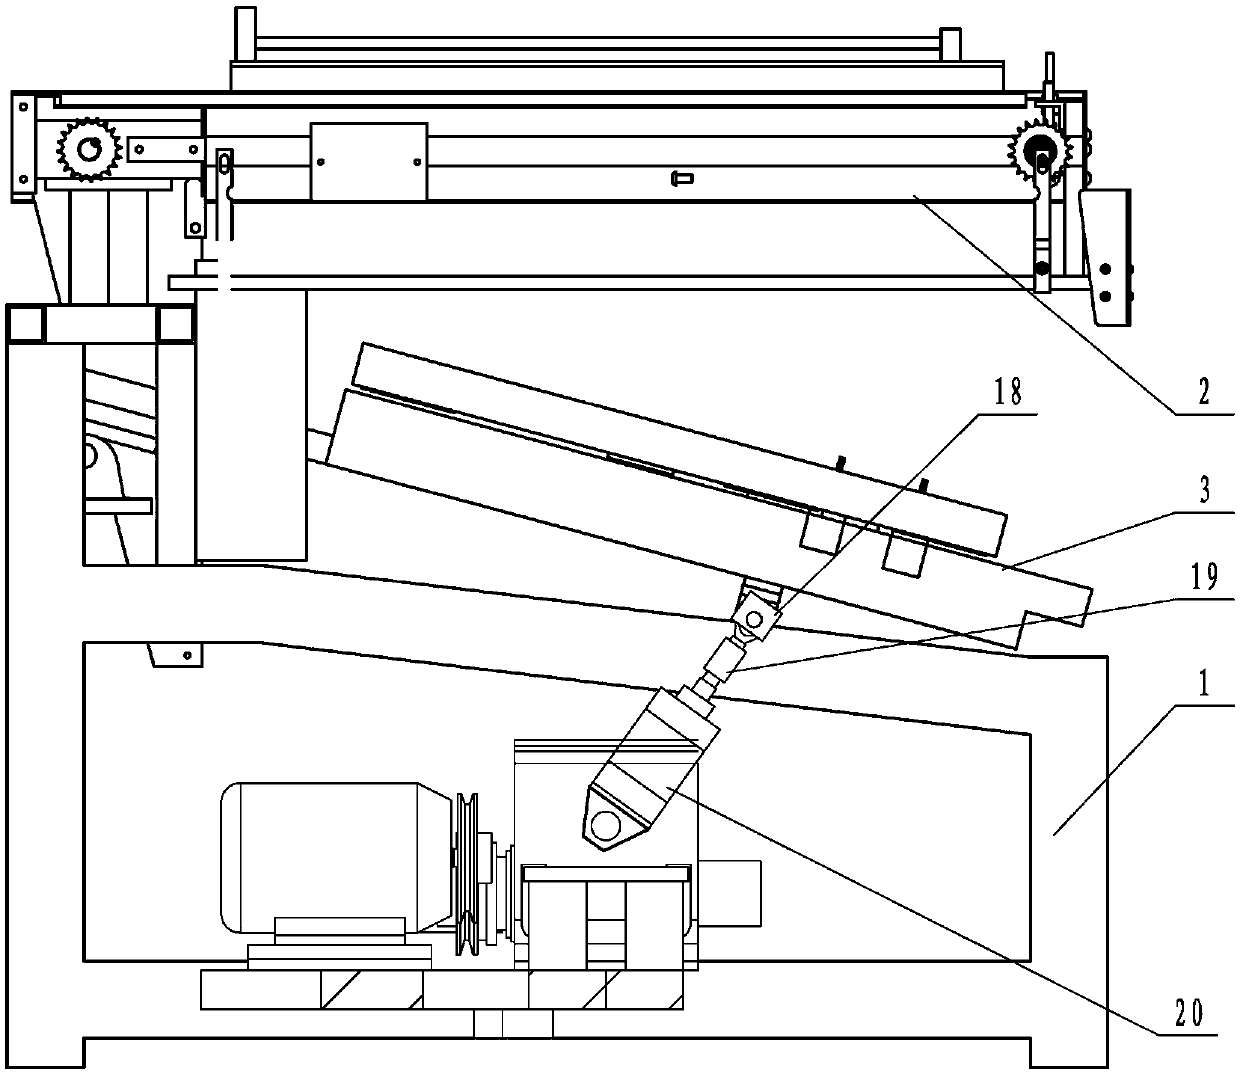 Screen printing machine for conveying materials in inclined rotating manner